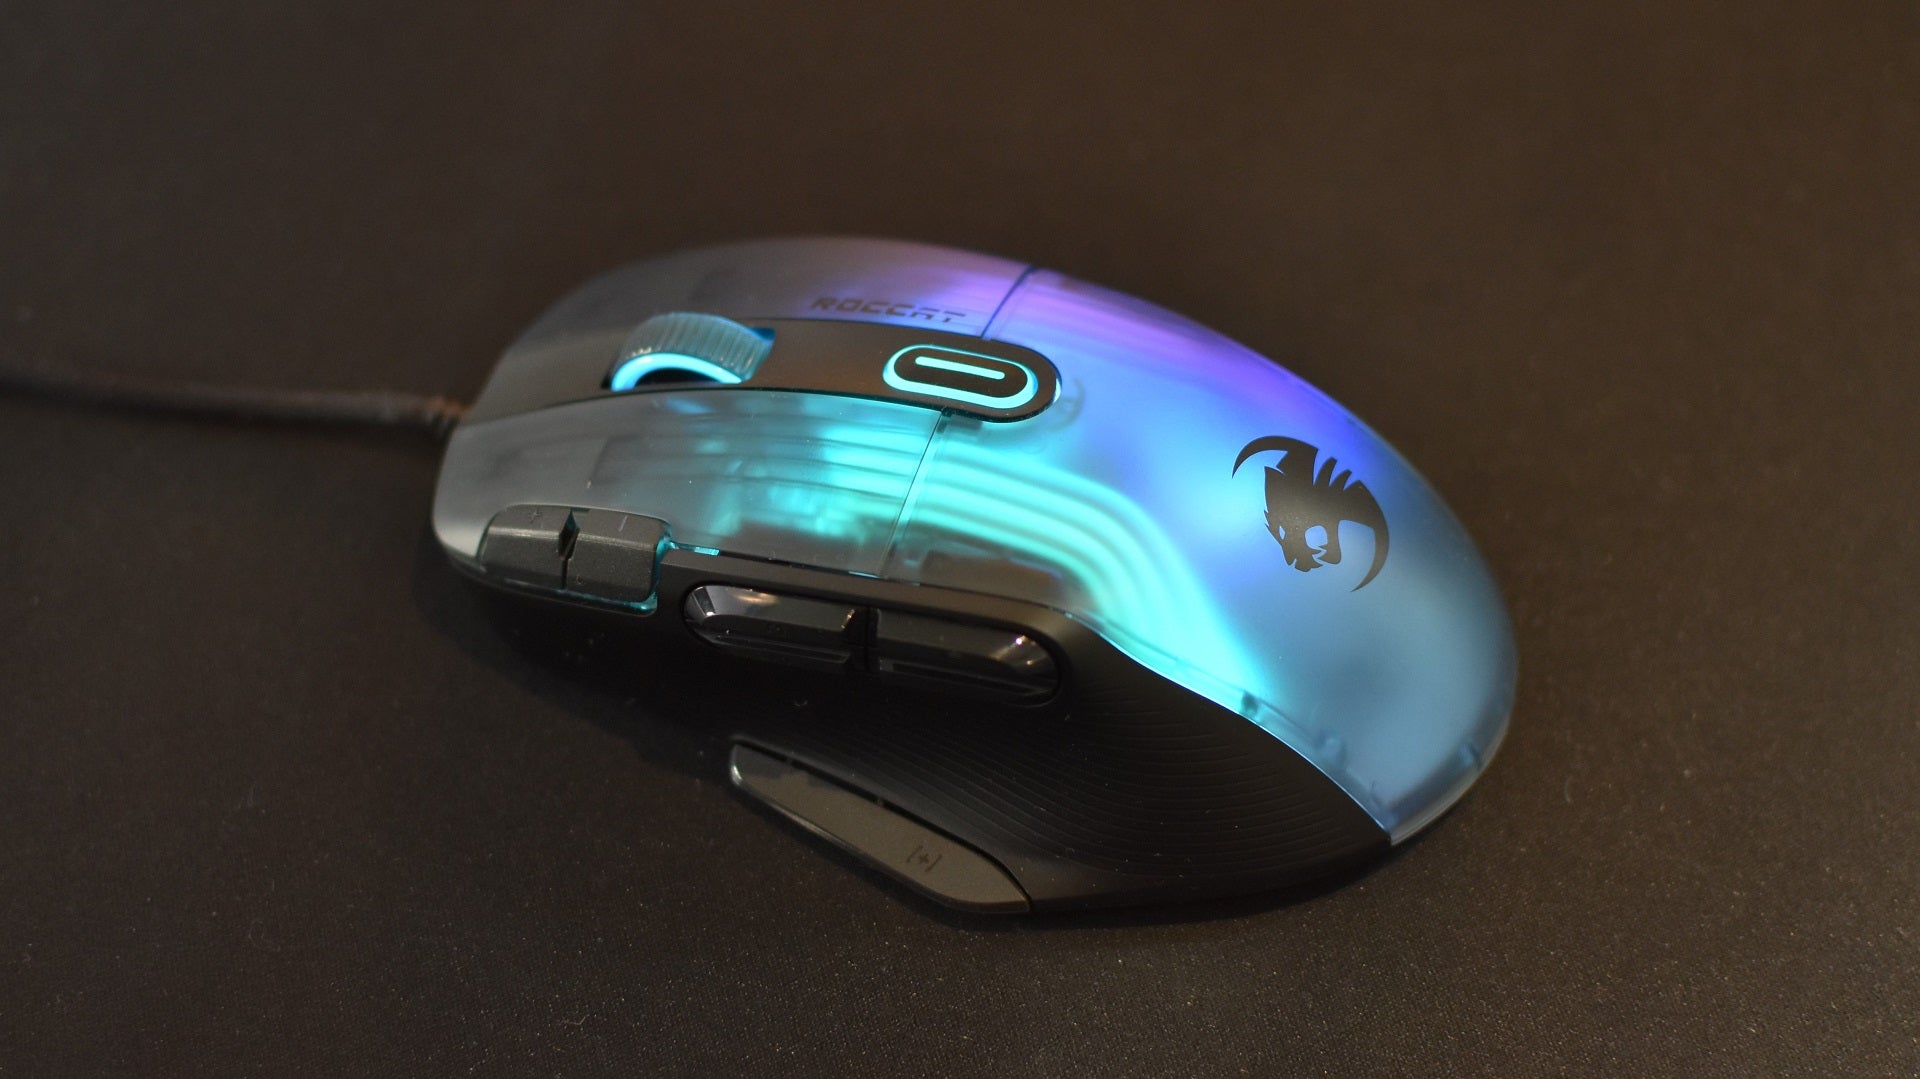 The Roccat Kone XP gaming mouse on a black mousepad.